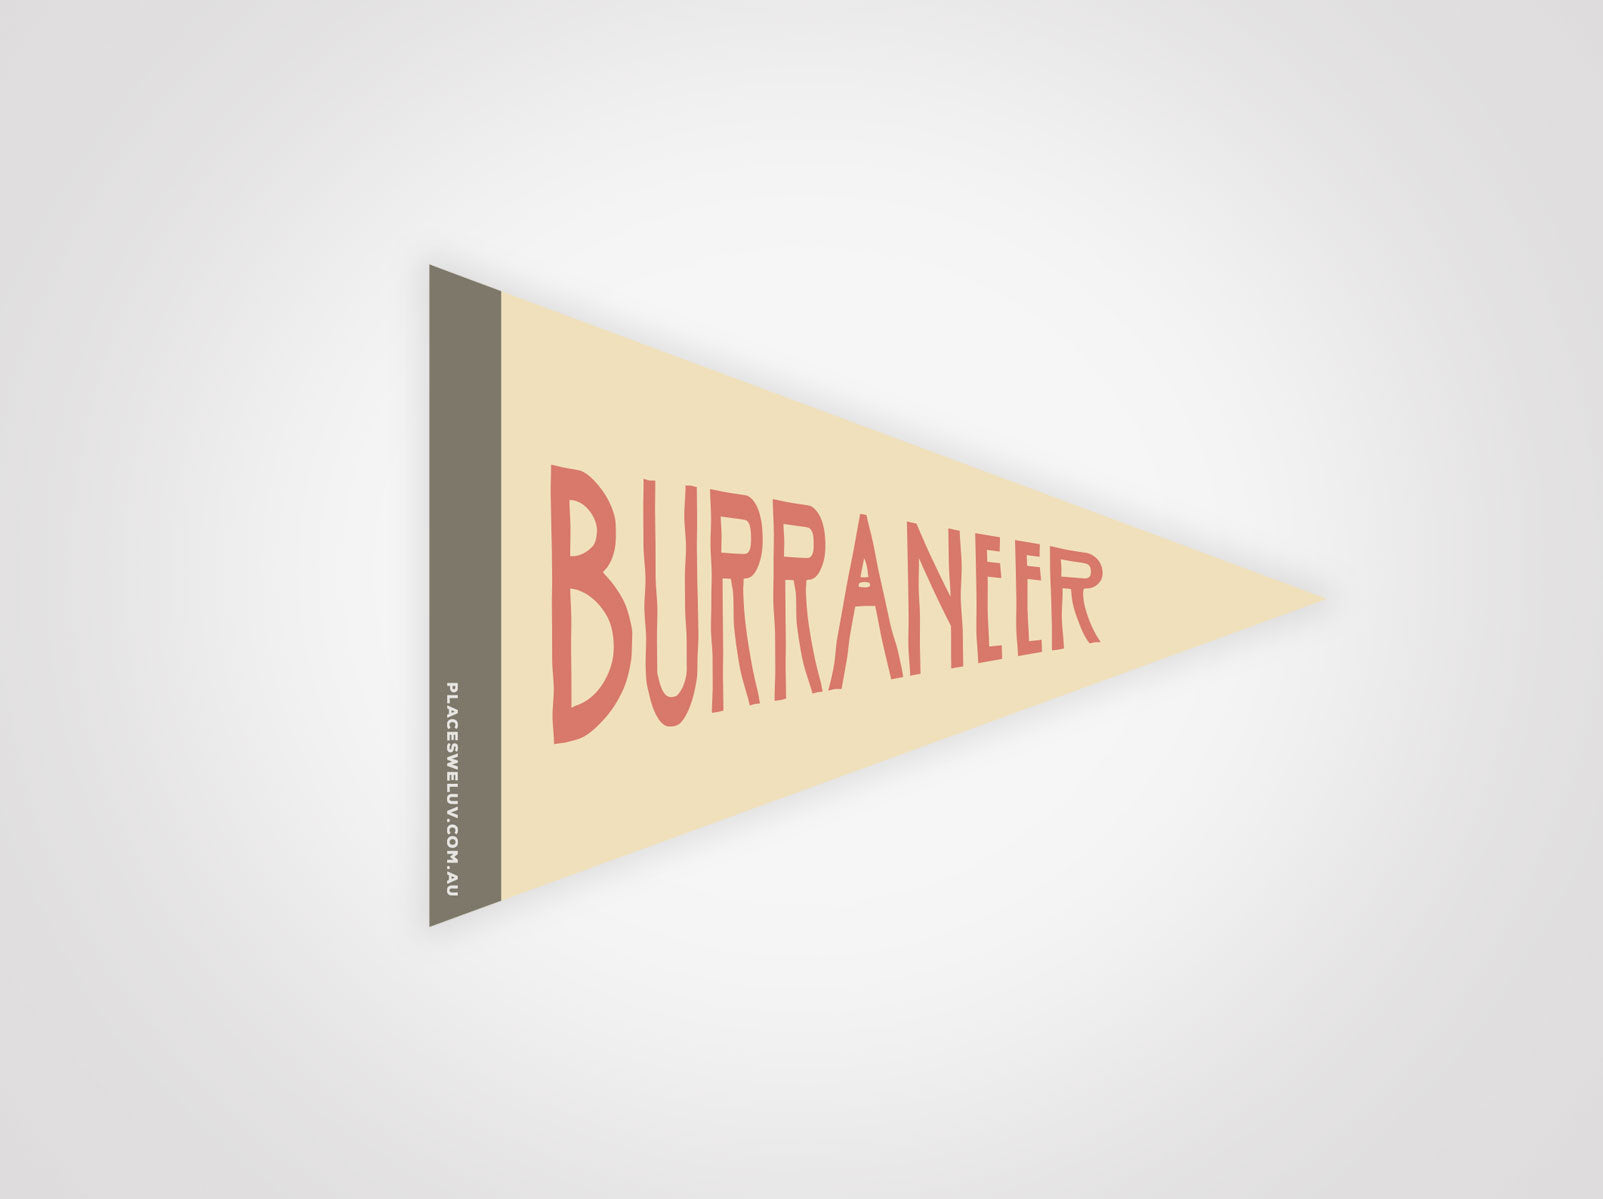 Burraneer bay retro travel flag decal by places we luv